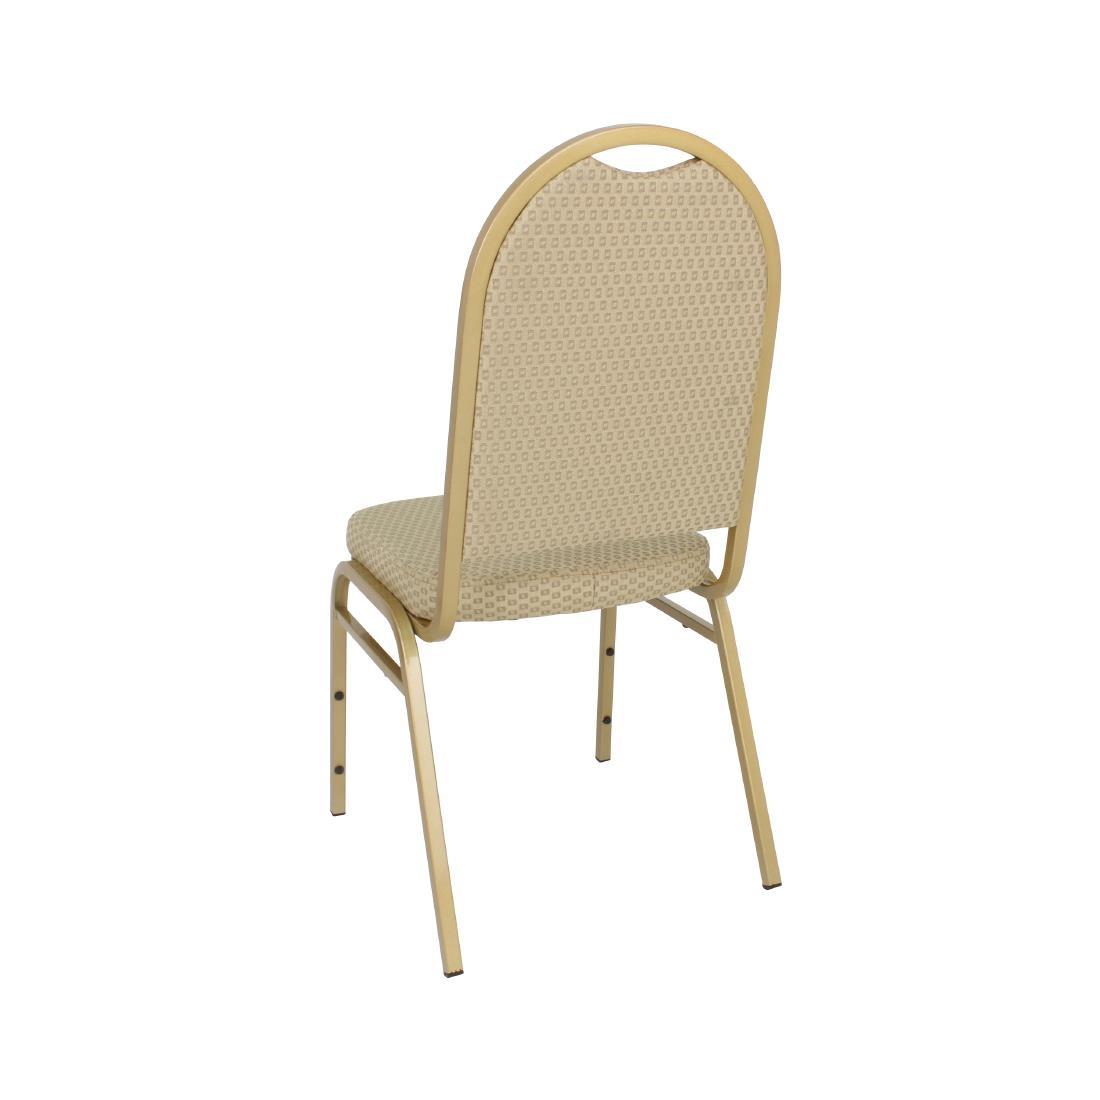 Bolero Steel Banquet Chairs with Neutral Cloth (Pack of 4) - GR360  - 2